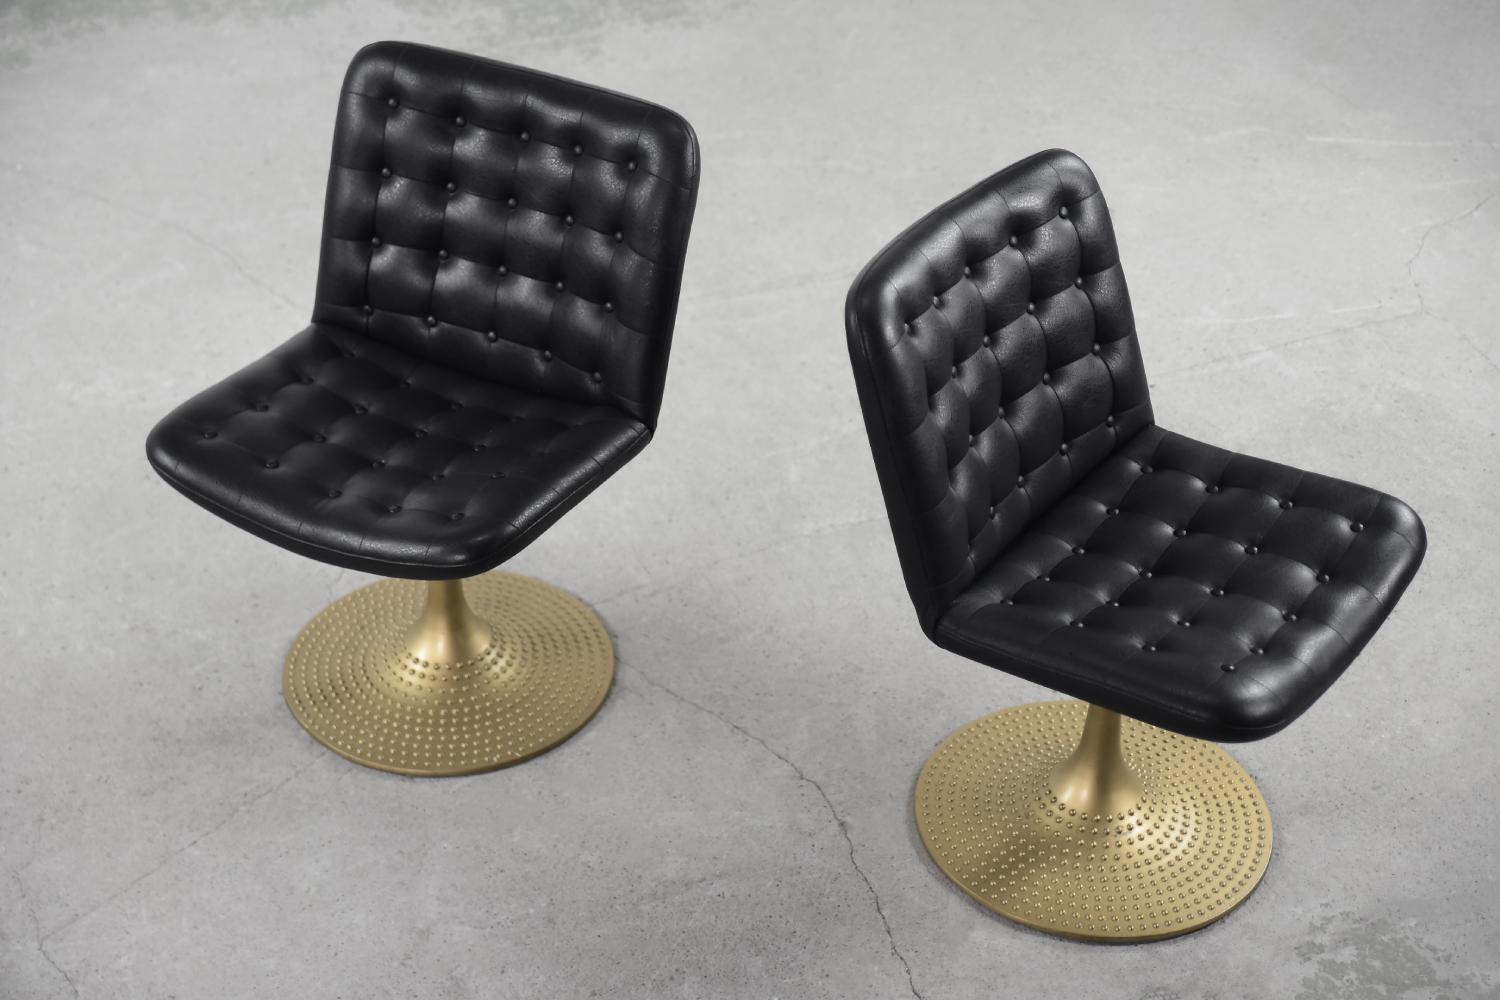 This set of two rare chairs was designed by Yrjö Kukkapuro for the Finnish Lepo Finn manufactory during the 1960s. The chairs are upholstered in black synthetic leather with quilting. The base is a decorated and finished in golden color, rotating